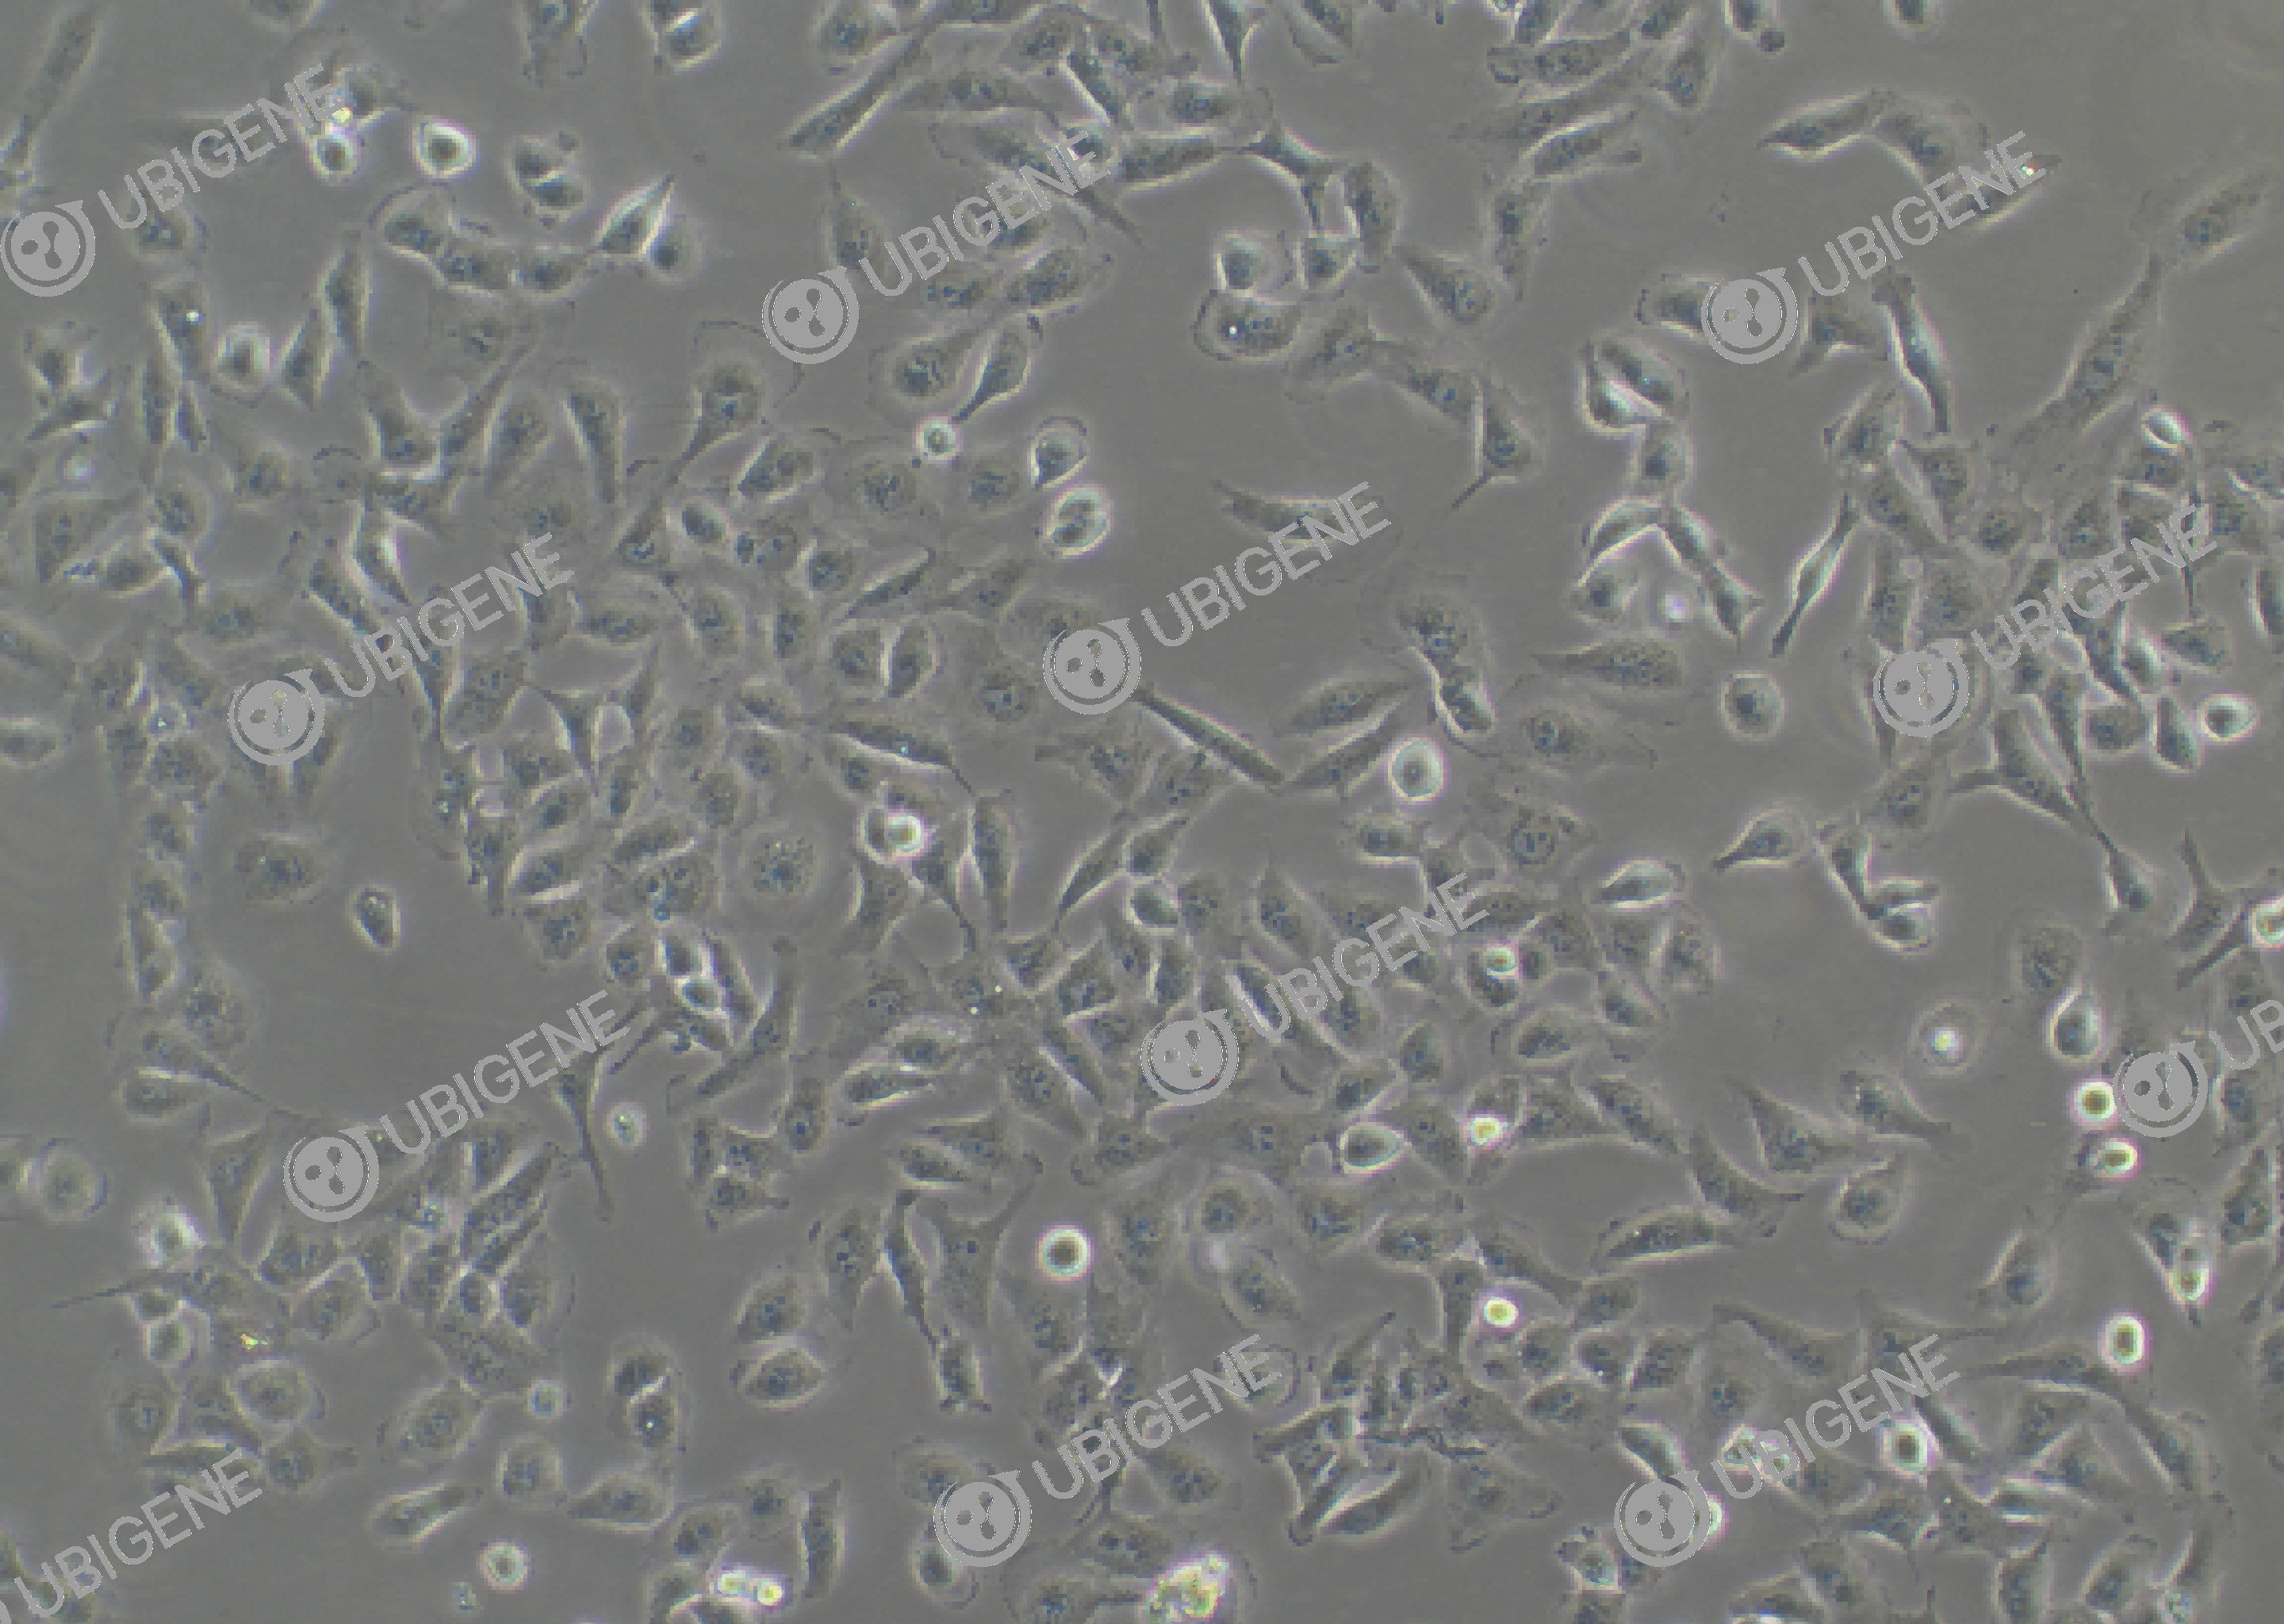 Nthy-ori 3-1 cell line Cultured cell morphology